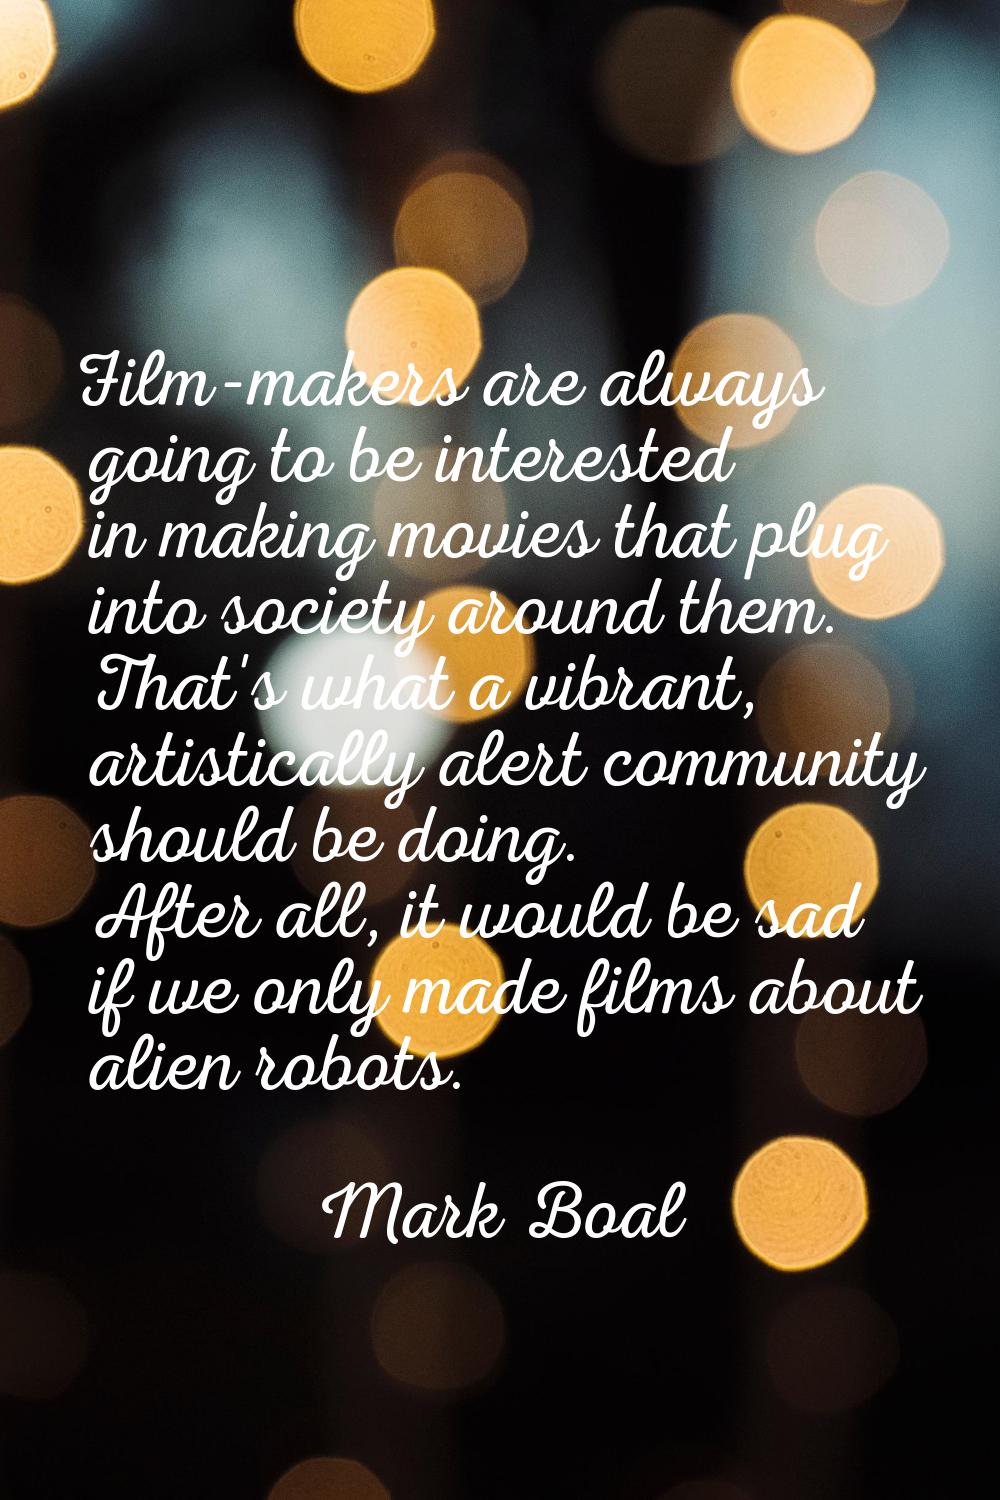 Film-makers are always going to be interested in making movies that plug into society around them. 